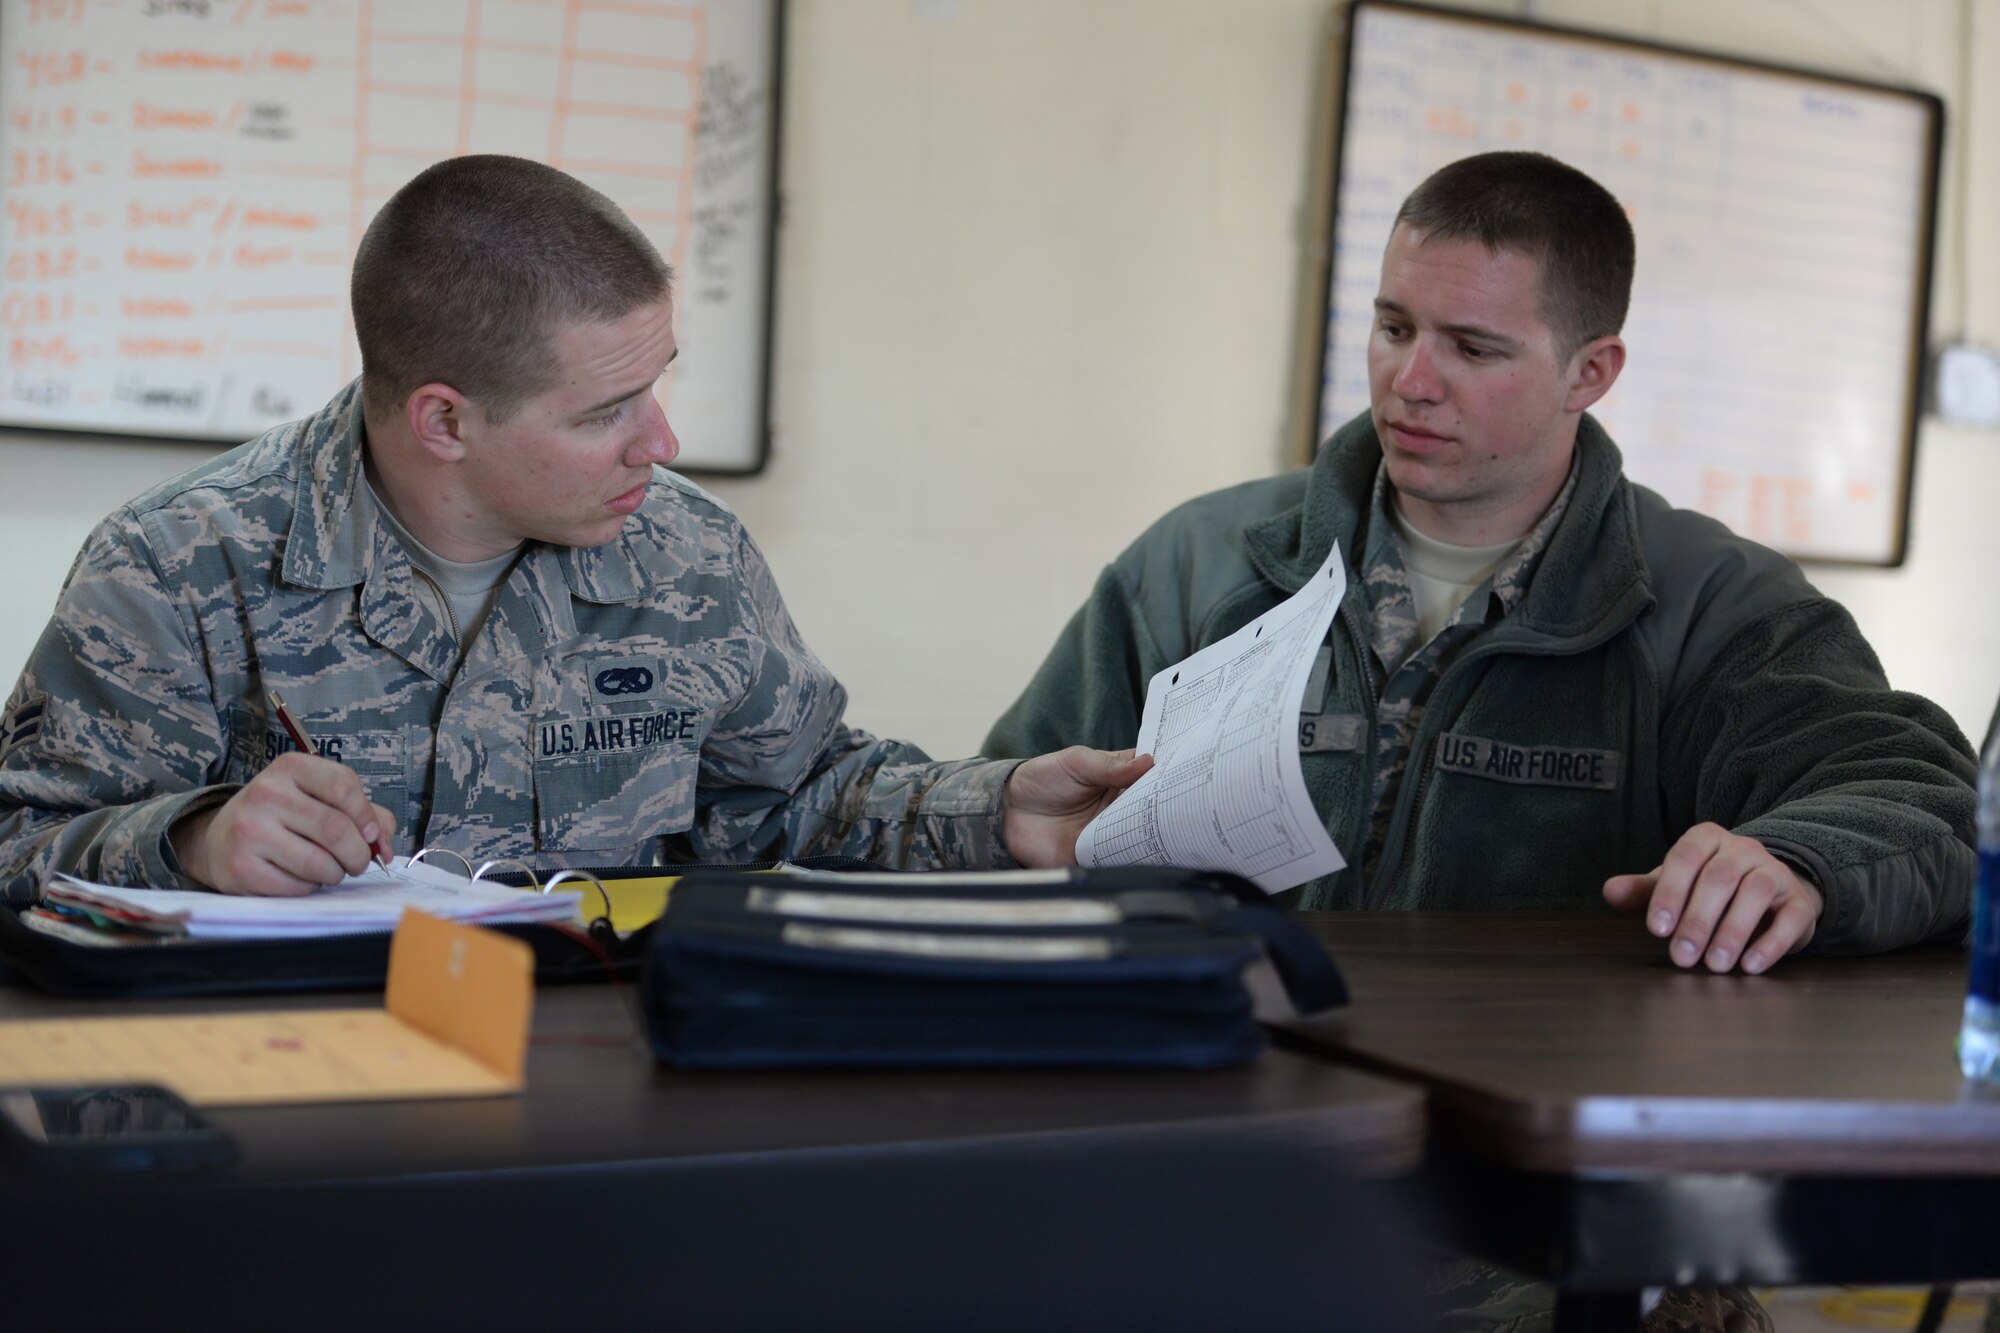 Airman 1st Class Nicholas Sirois and Staff Sgt. Michael Sirois review record documentation while particpating in Sentry Savannah 15-1, Feb 13, 2015, Savannah, Ga.  Sentry Savannah 15-1 is the Air National Guard's largest Fighter Integration, Air-to-Air, training exercise encompassing 4th and 5th generation aircraft.  (U.S. Air National Guard photo by Master Sgt. Ralph Kapustka/Released)